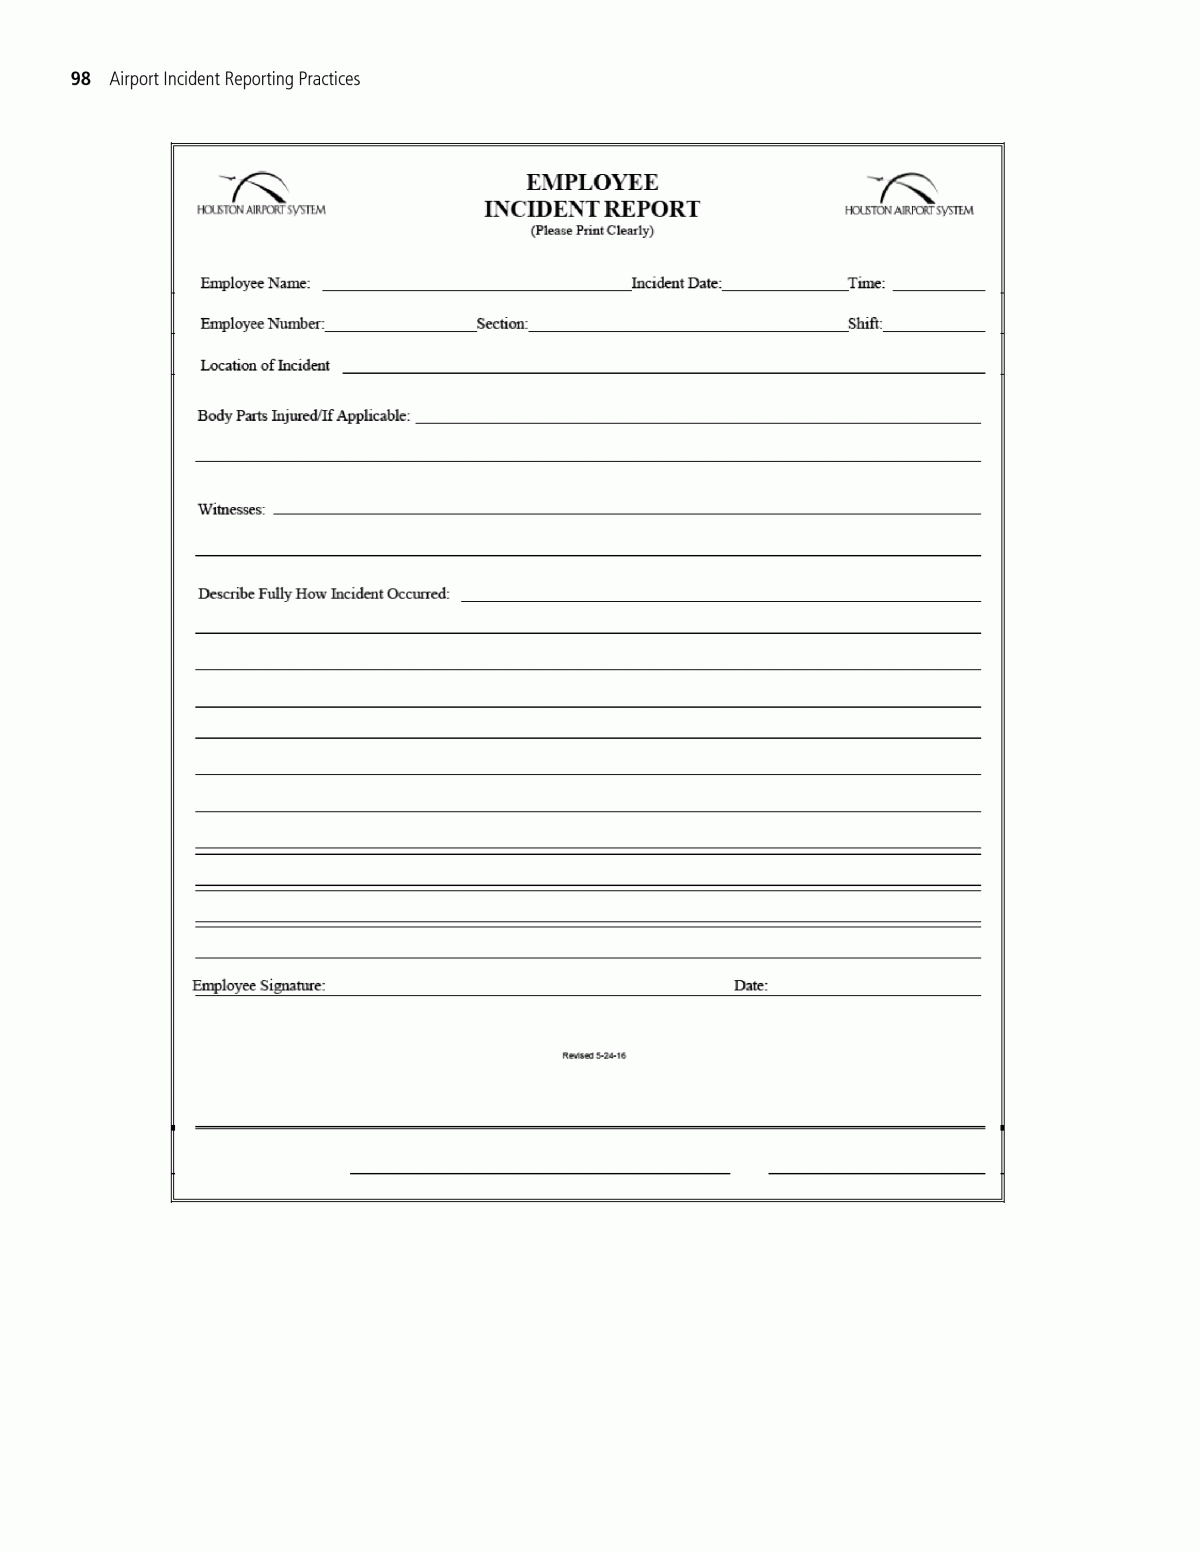 Appendix H - Sample Employee Incident Report Form | Airport Throughout Incident Report Book Template